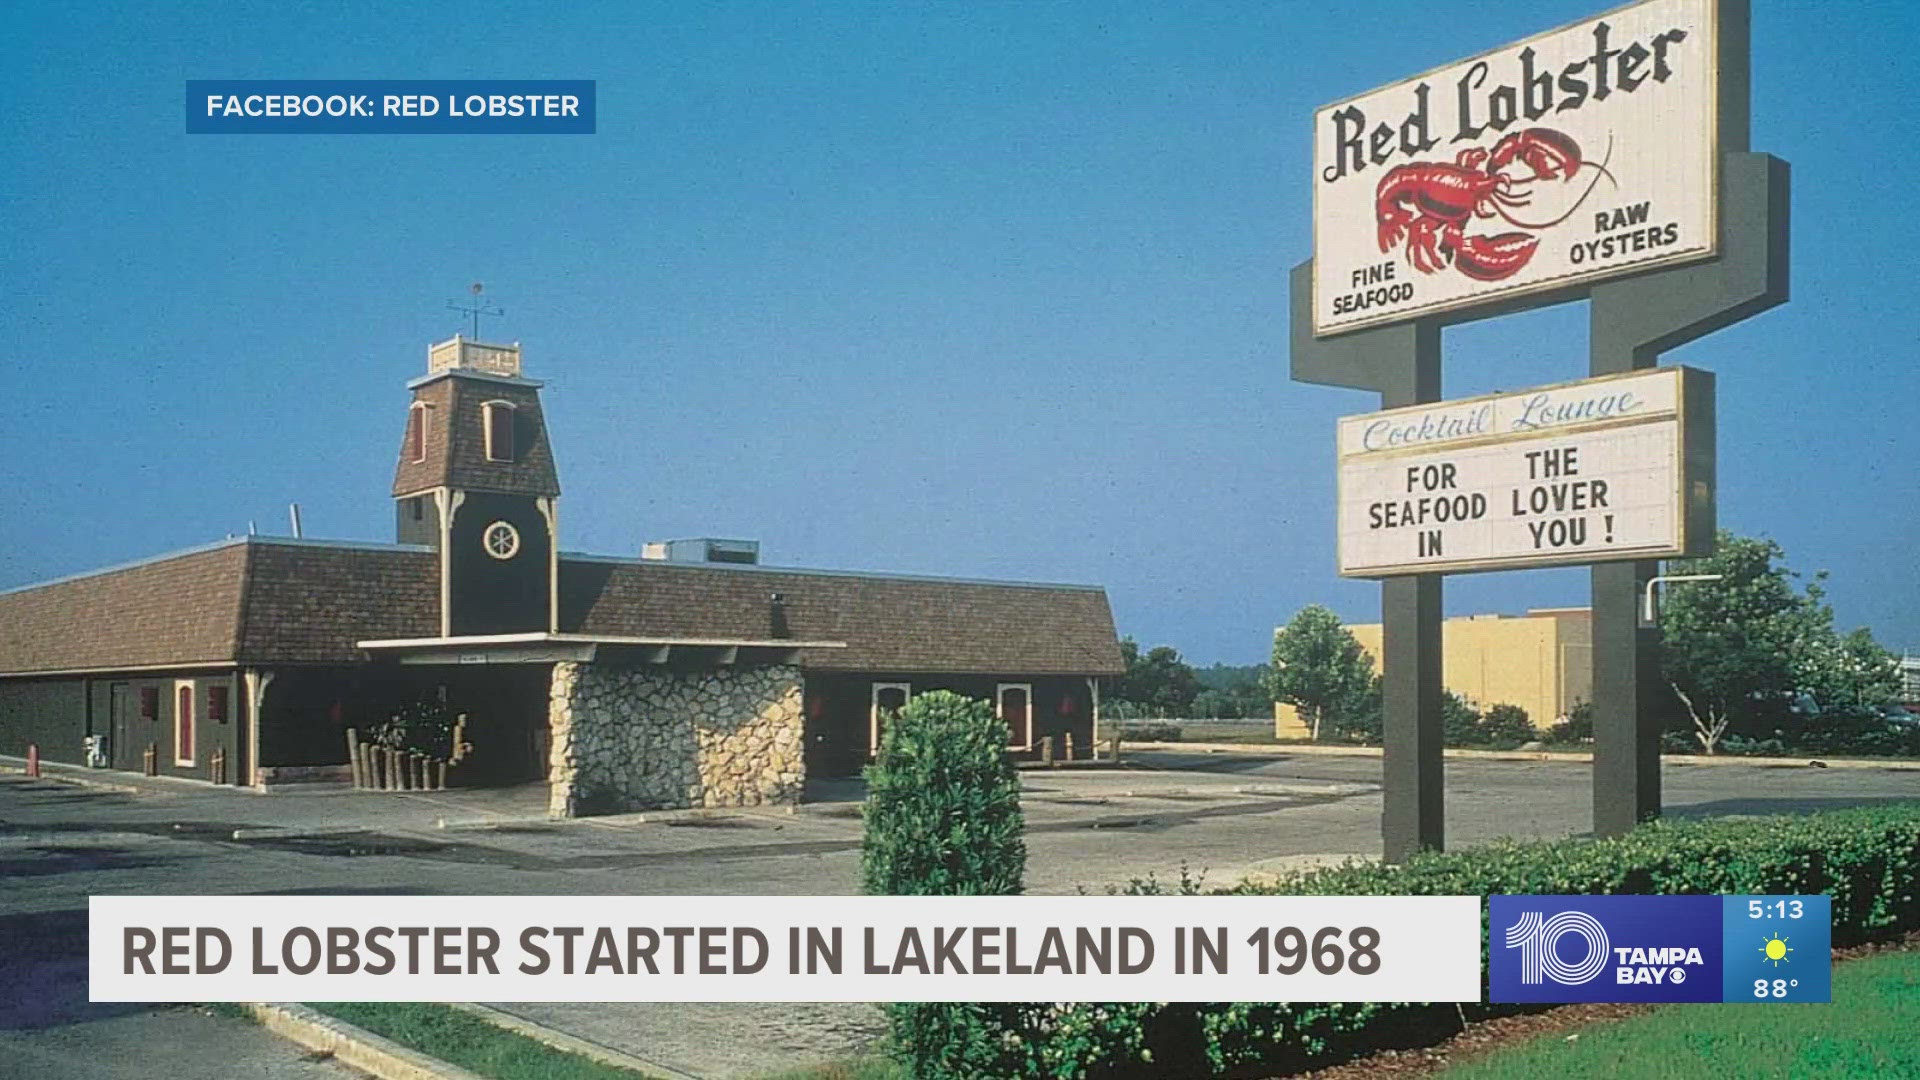 This week, Red Lobster began liquidating, closing dozens of restaurants. The bar tops and space itself are triggering memories for those who visit the shop.